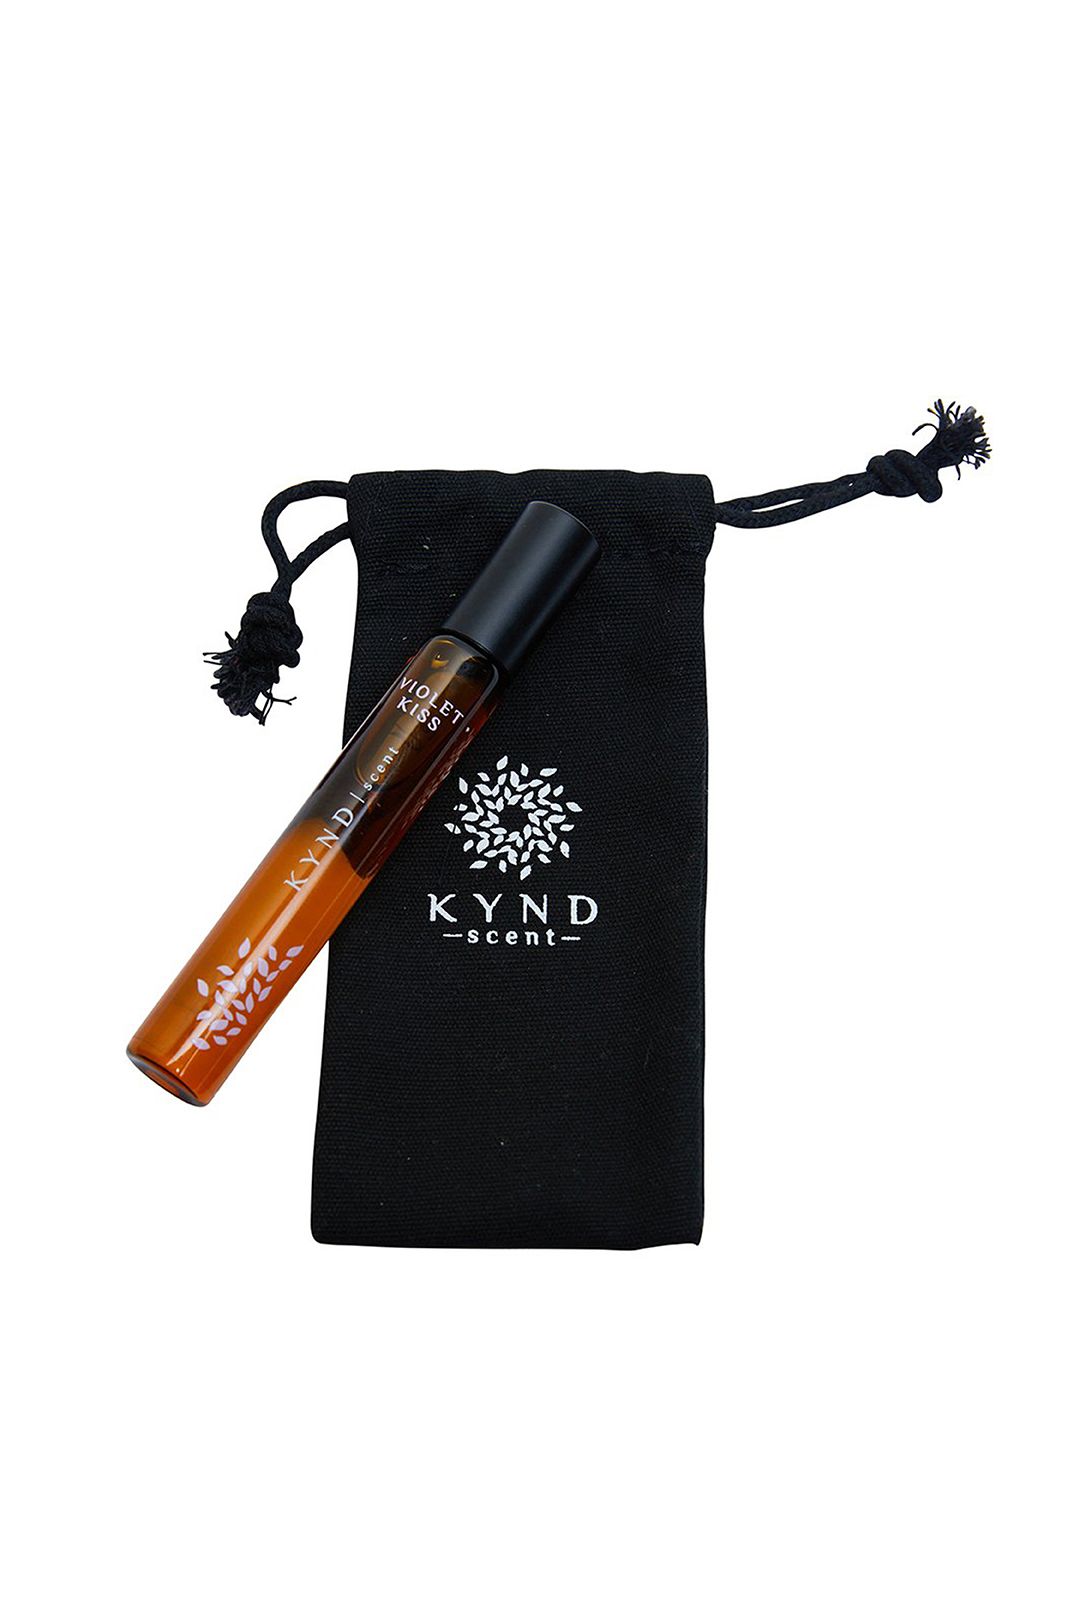 kynd-scent-violet-kiss-product-3